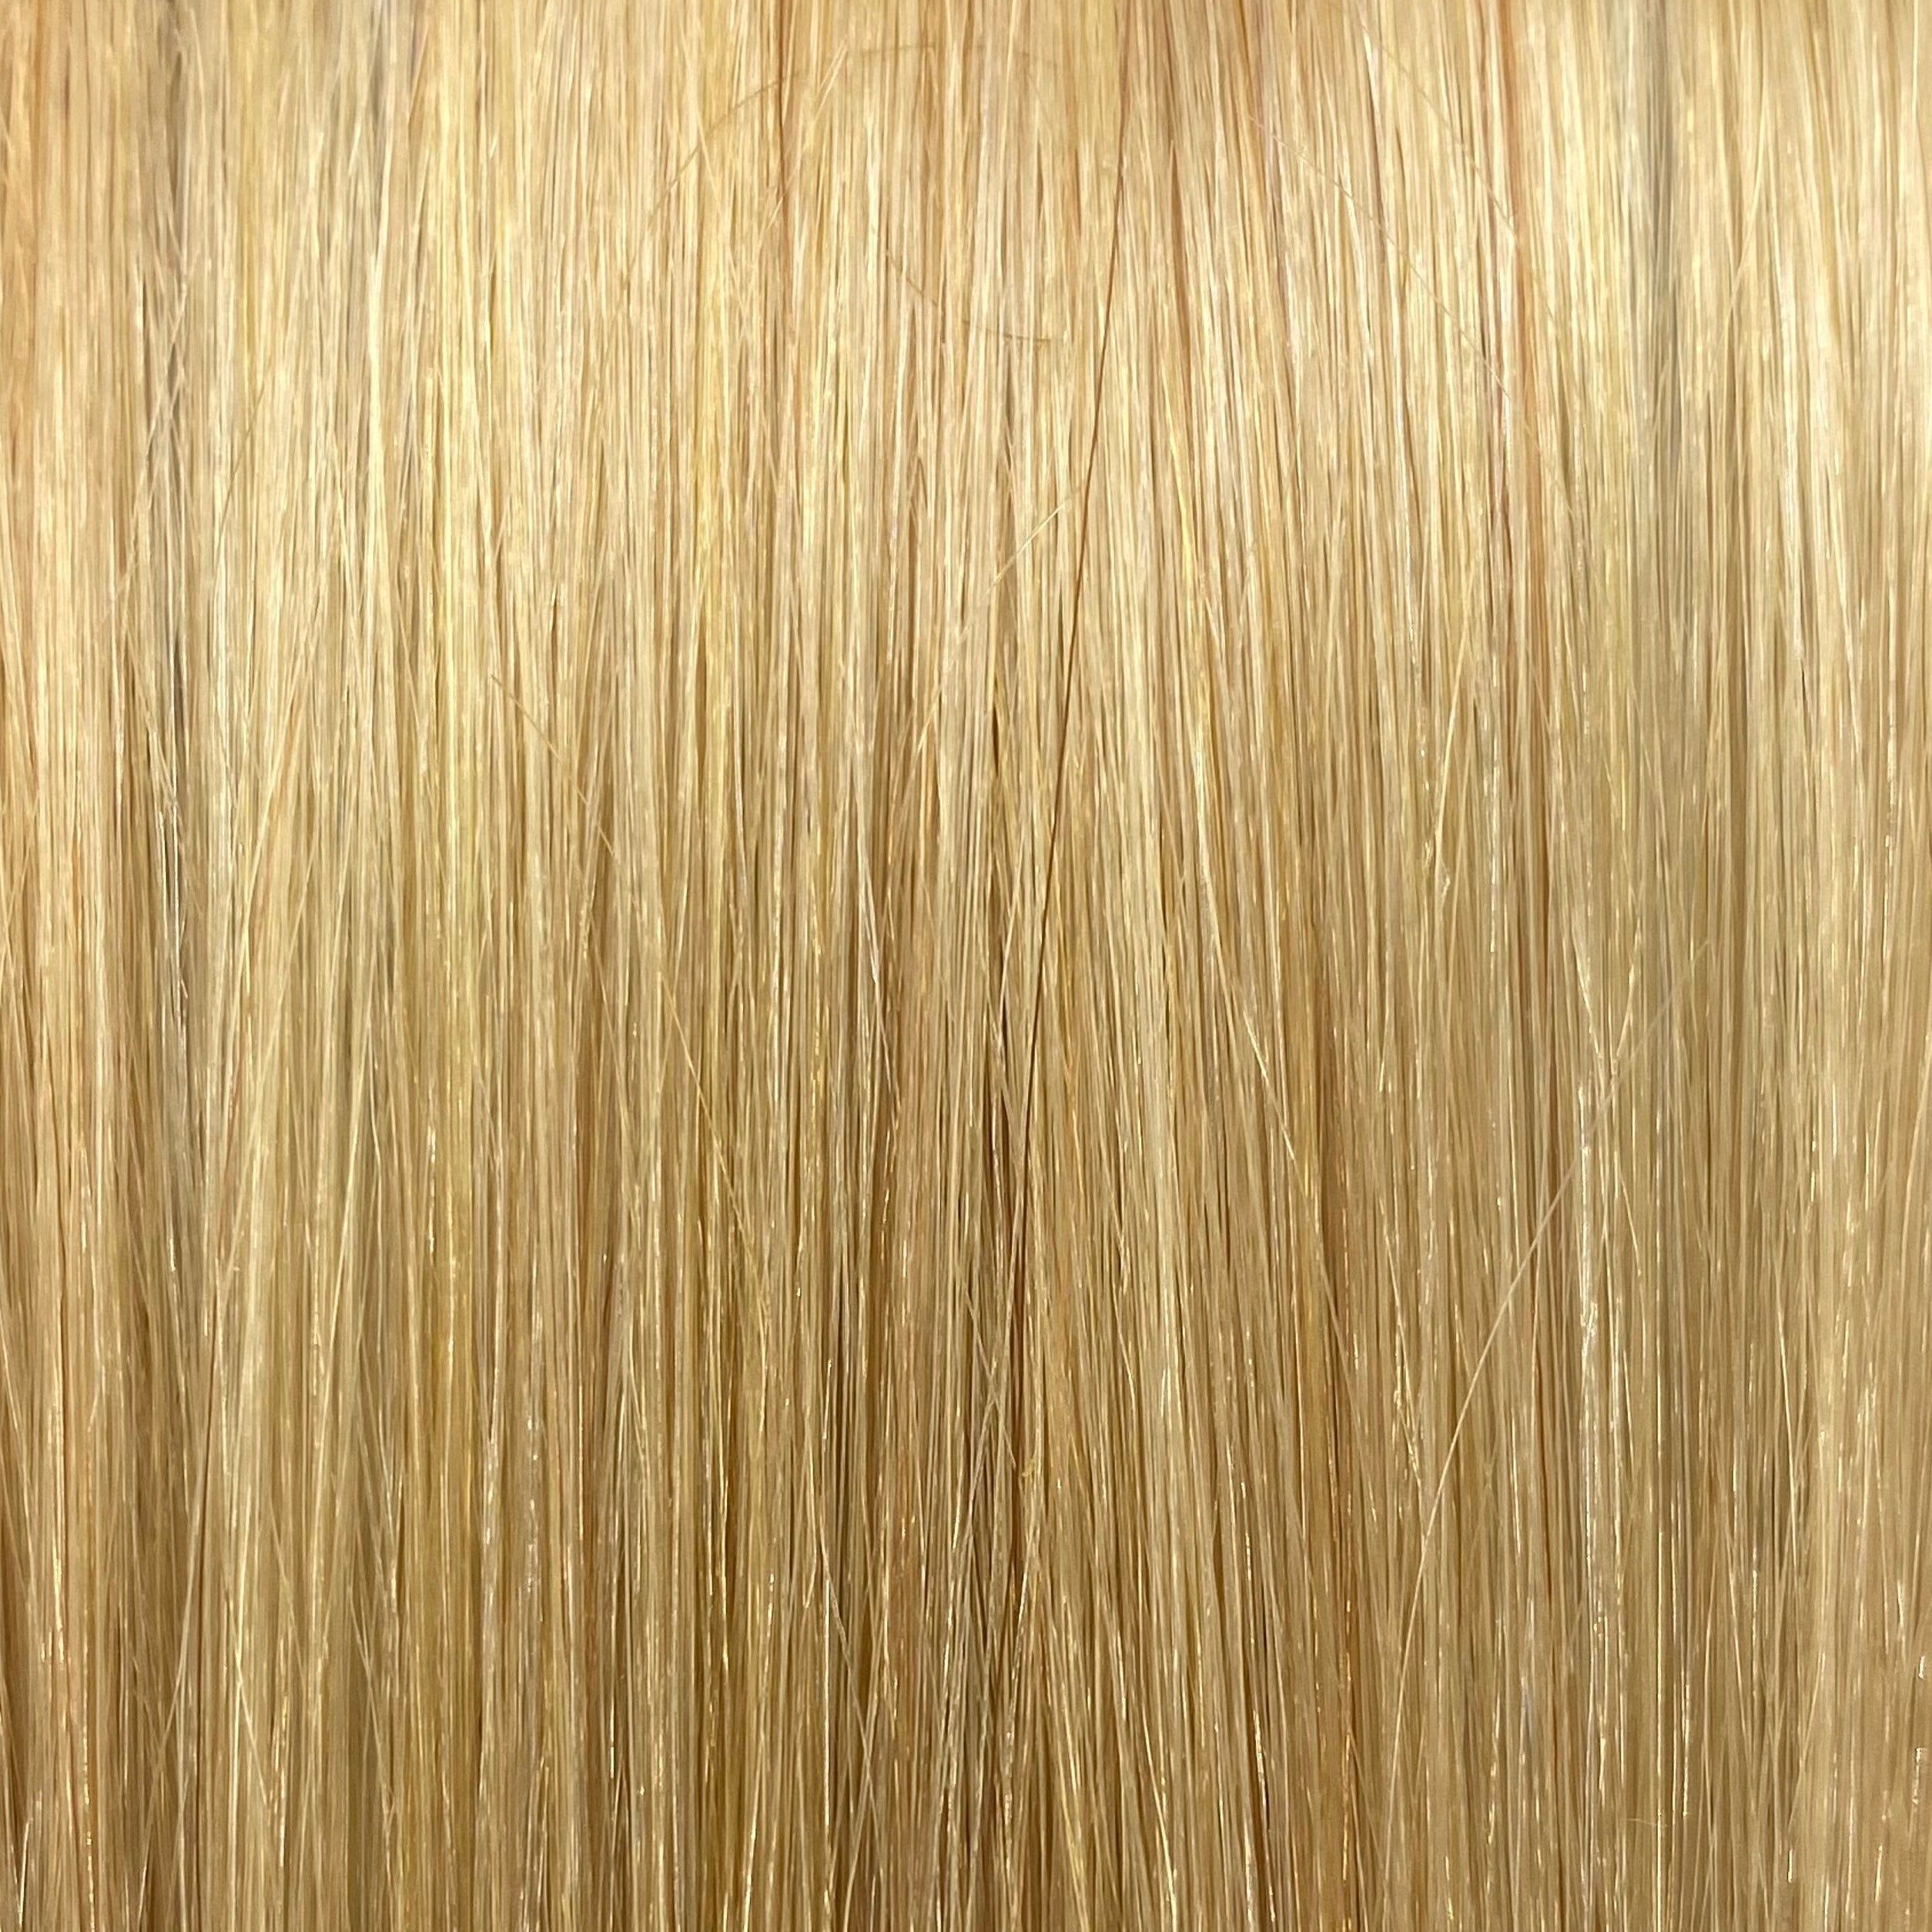 FUSION #DB2 LIGHT GOLDEN BLONDE 40CM/ 16 INCHES  -  17.5 GRAMS